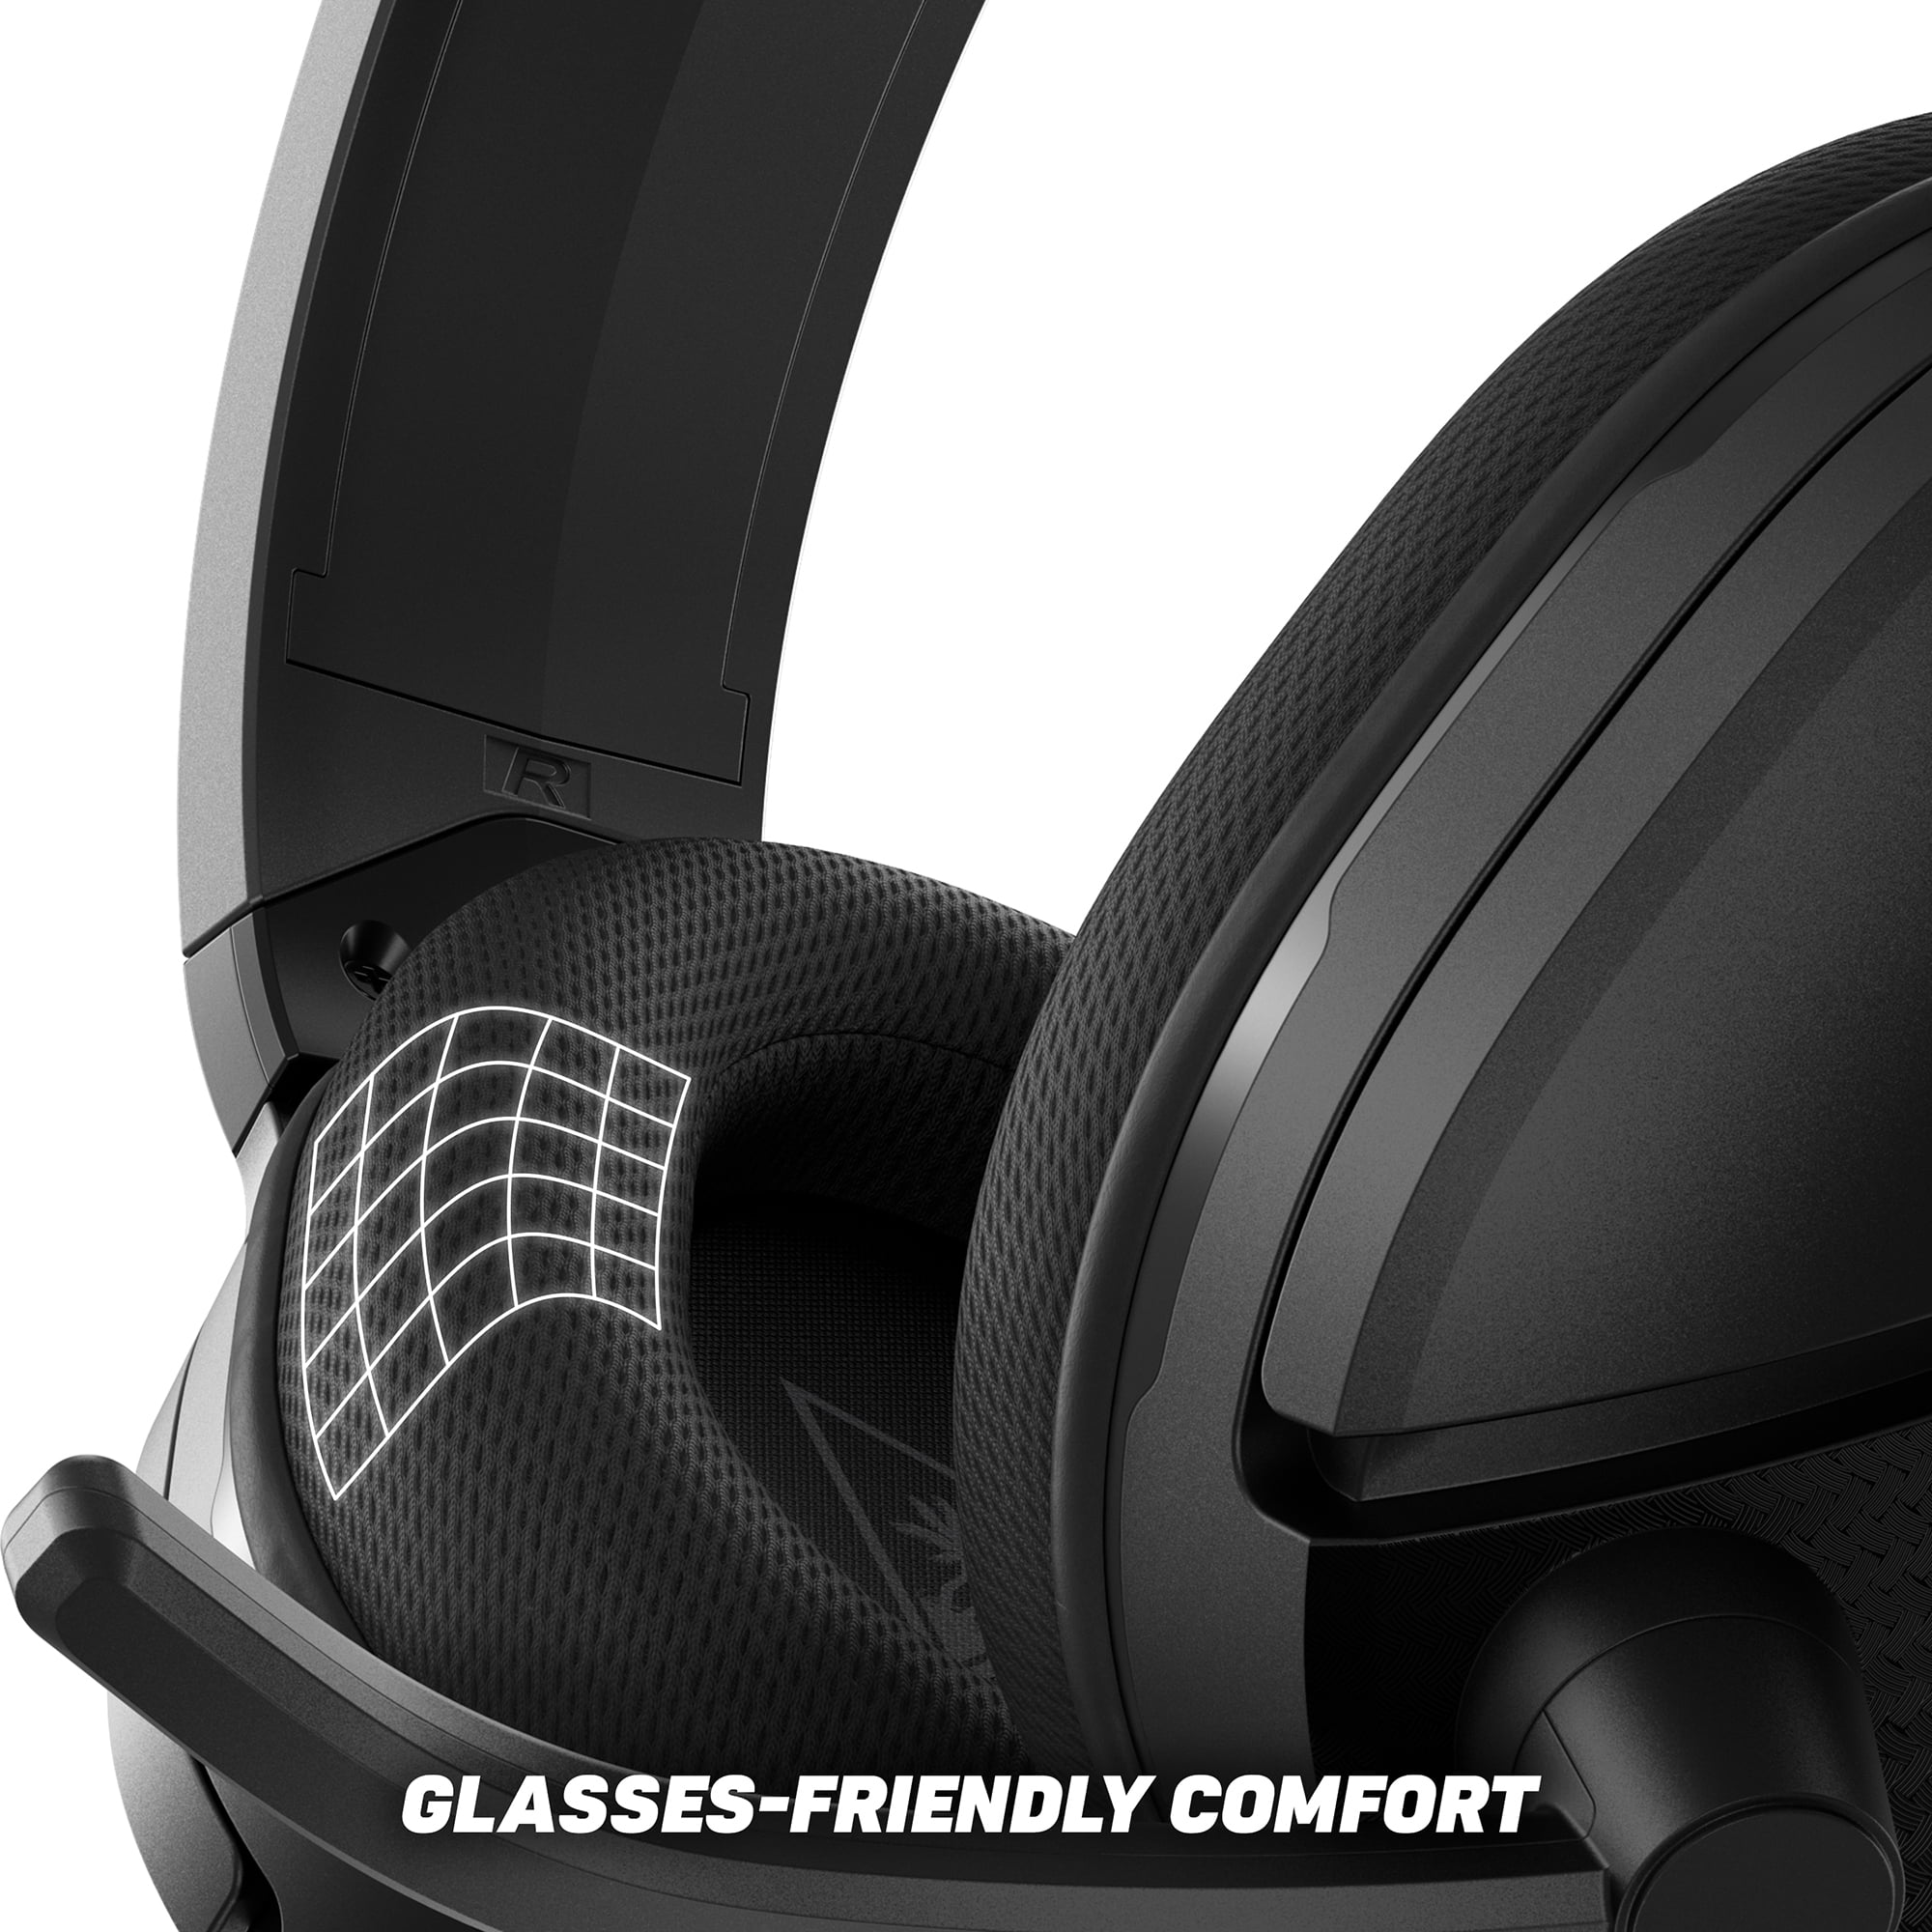 Turtle Beach® Recon™ 200 Gen 2 Wired Powered Gaming Headset - Black, 1 ct -  Smith's Food and Drug